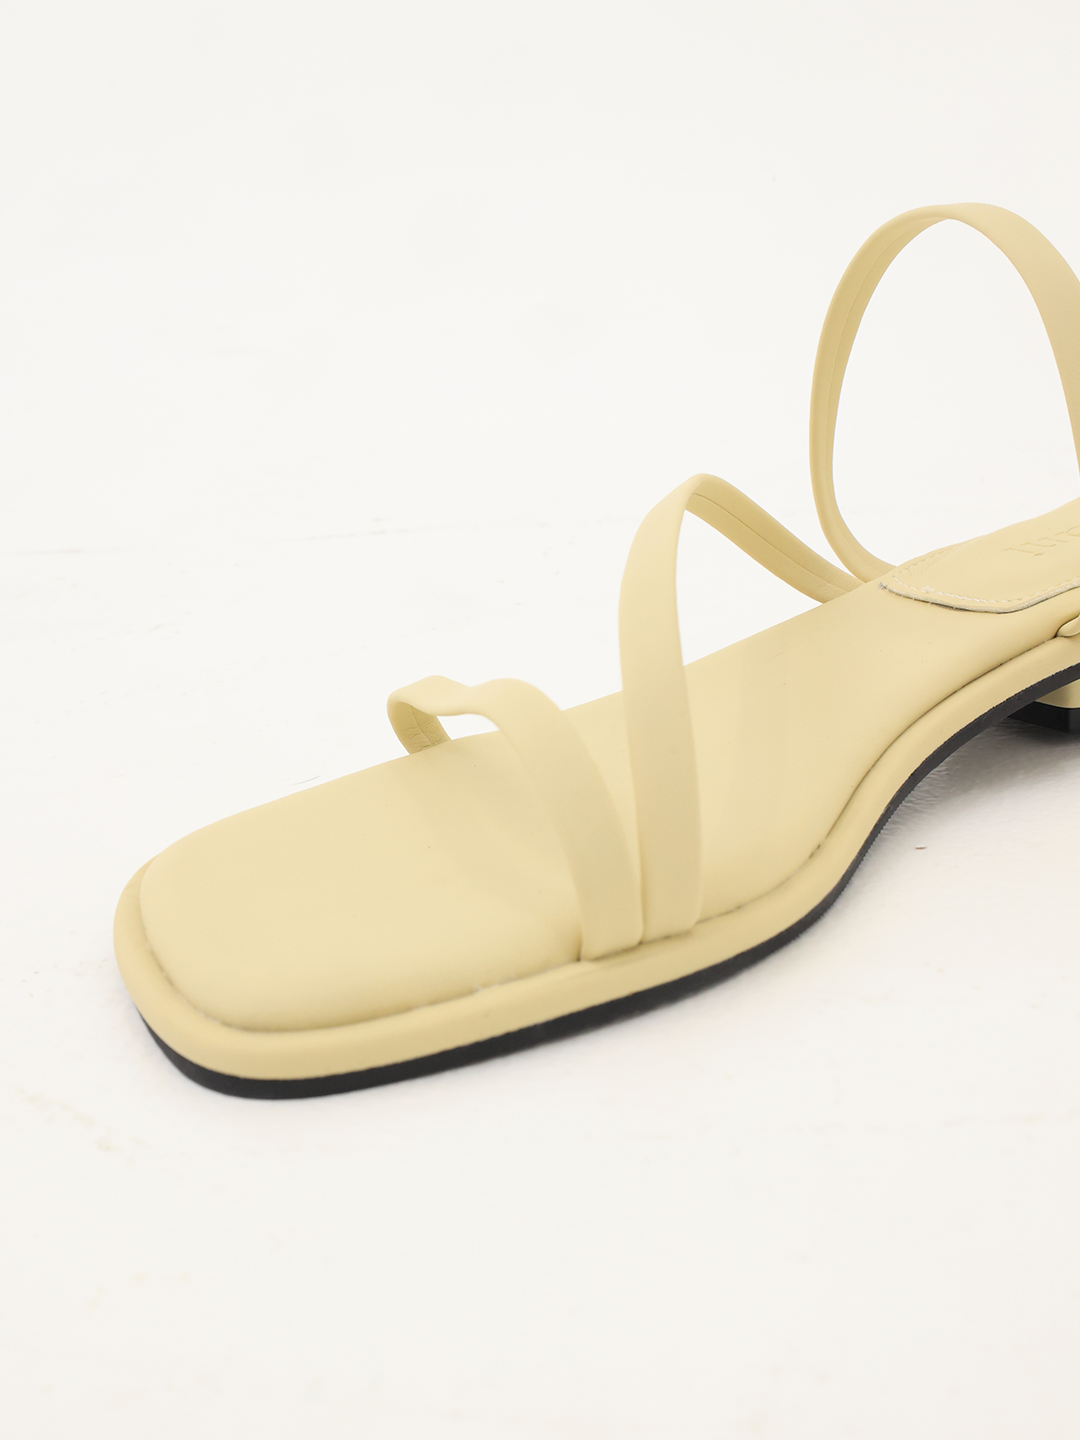 ASUNI Square Toe Candy Flip Flops in Yellow